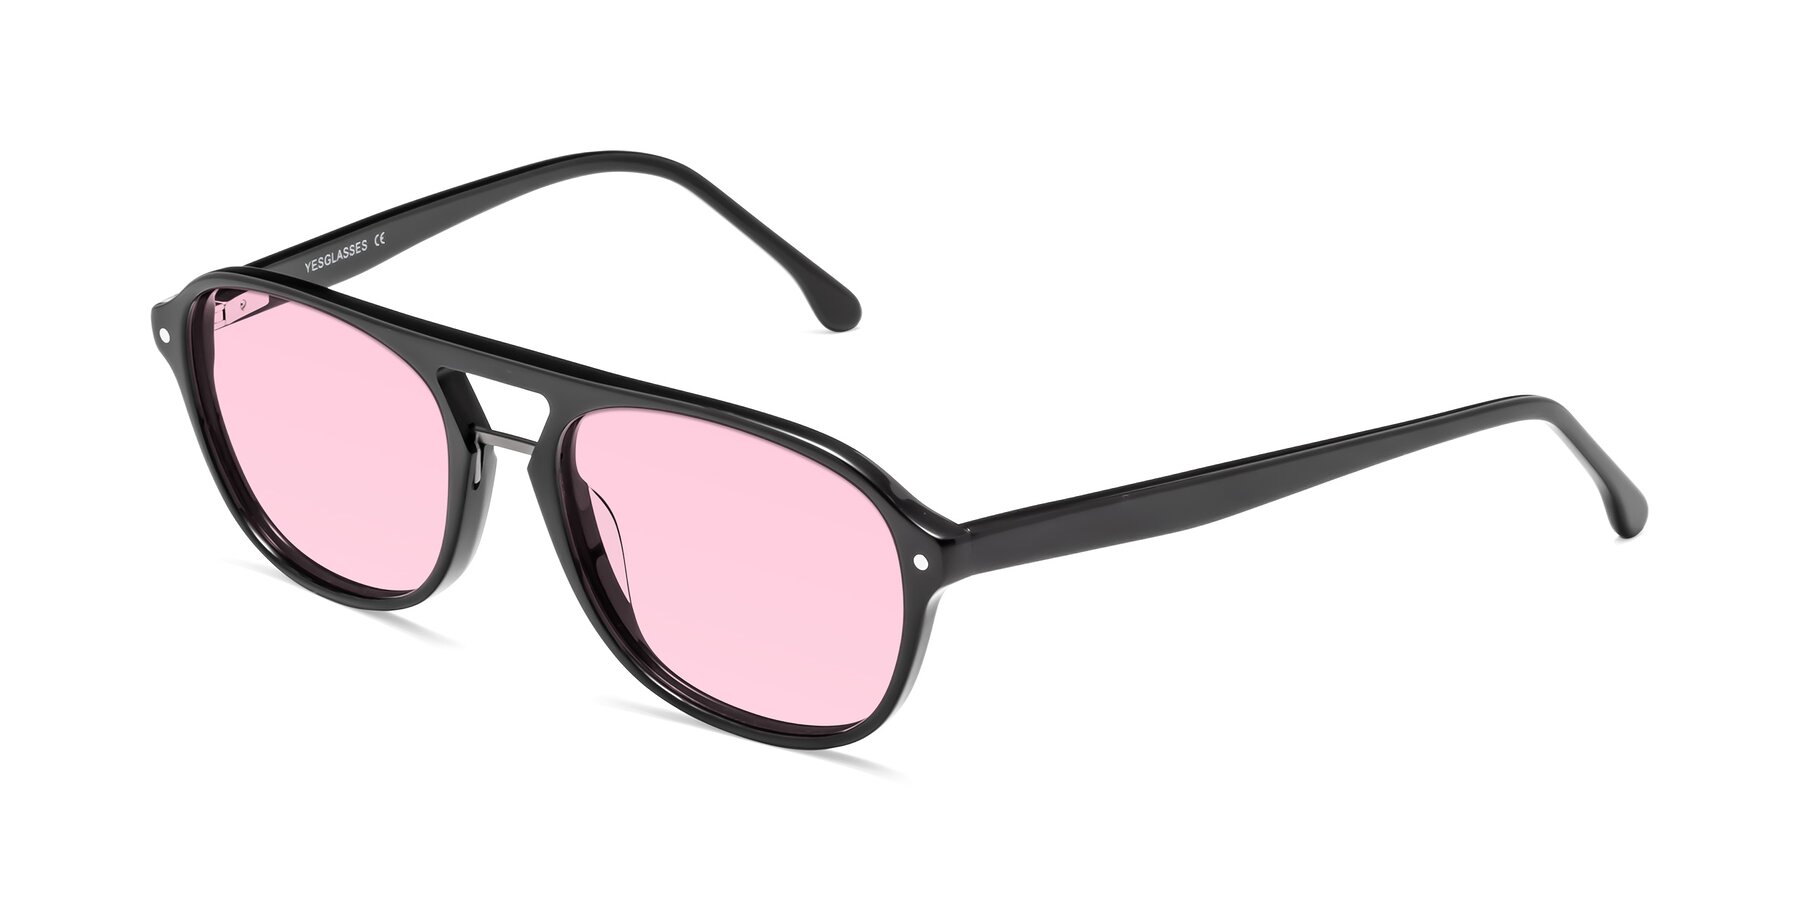 Angle of 17416 in Black with Light Pink Tinted Lenses